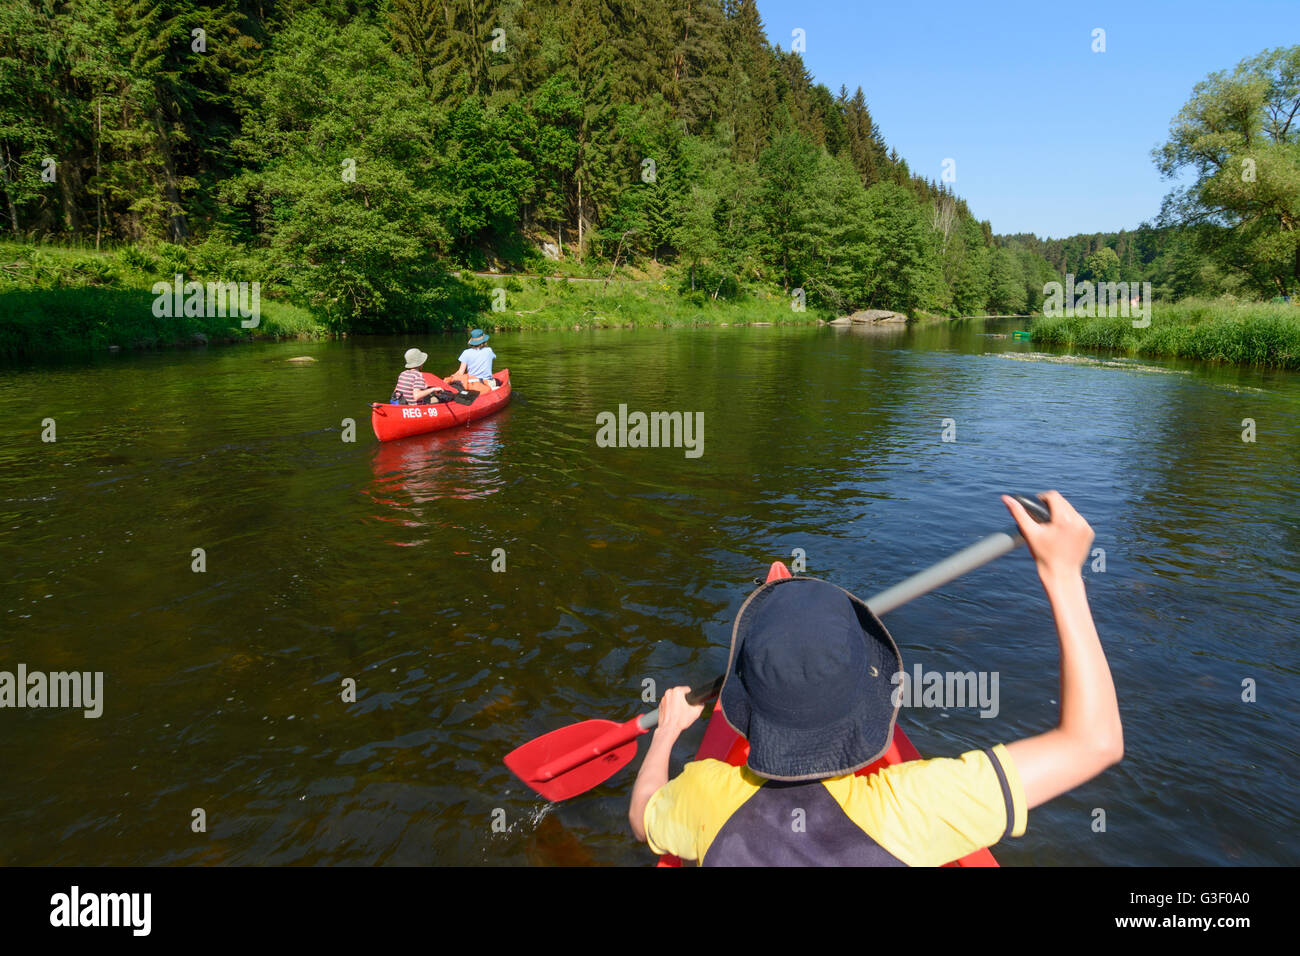 Page 14 - Schwarzer High Resolution Stock Photography and Images - Alamy